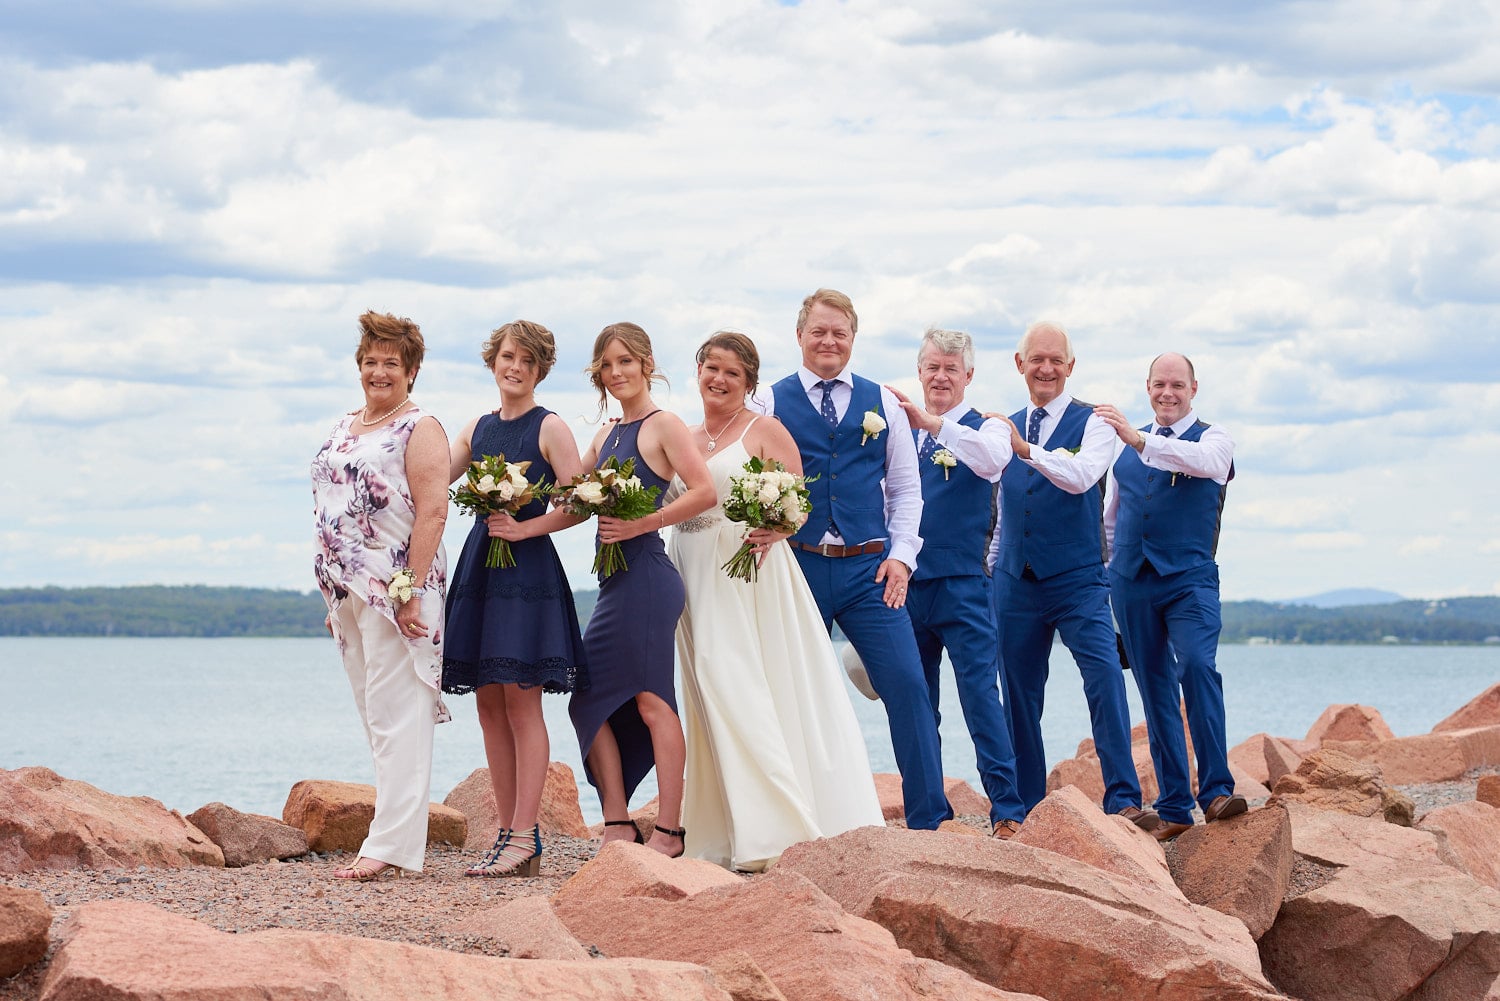 Wedding Group of people at Affordable wedding photography Sydney